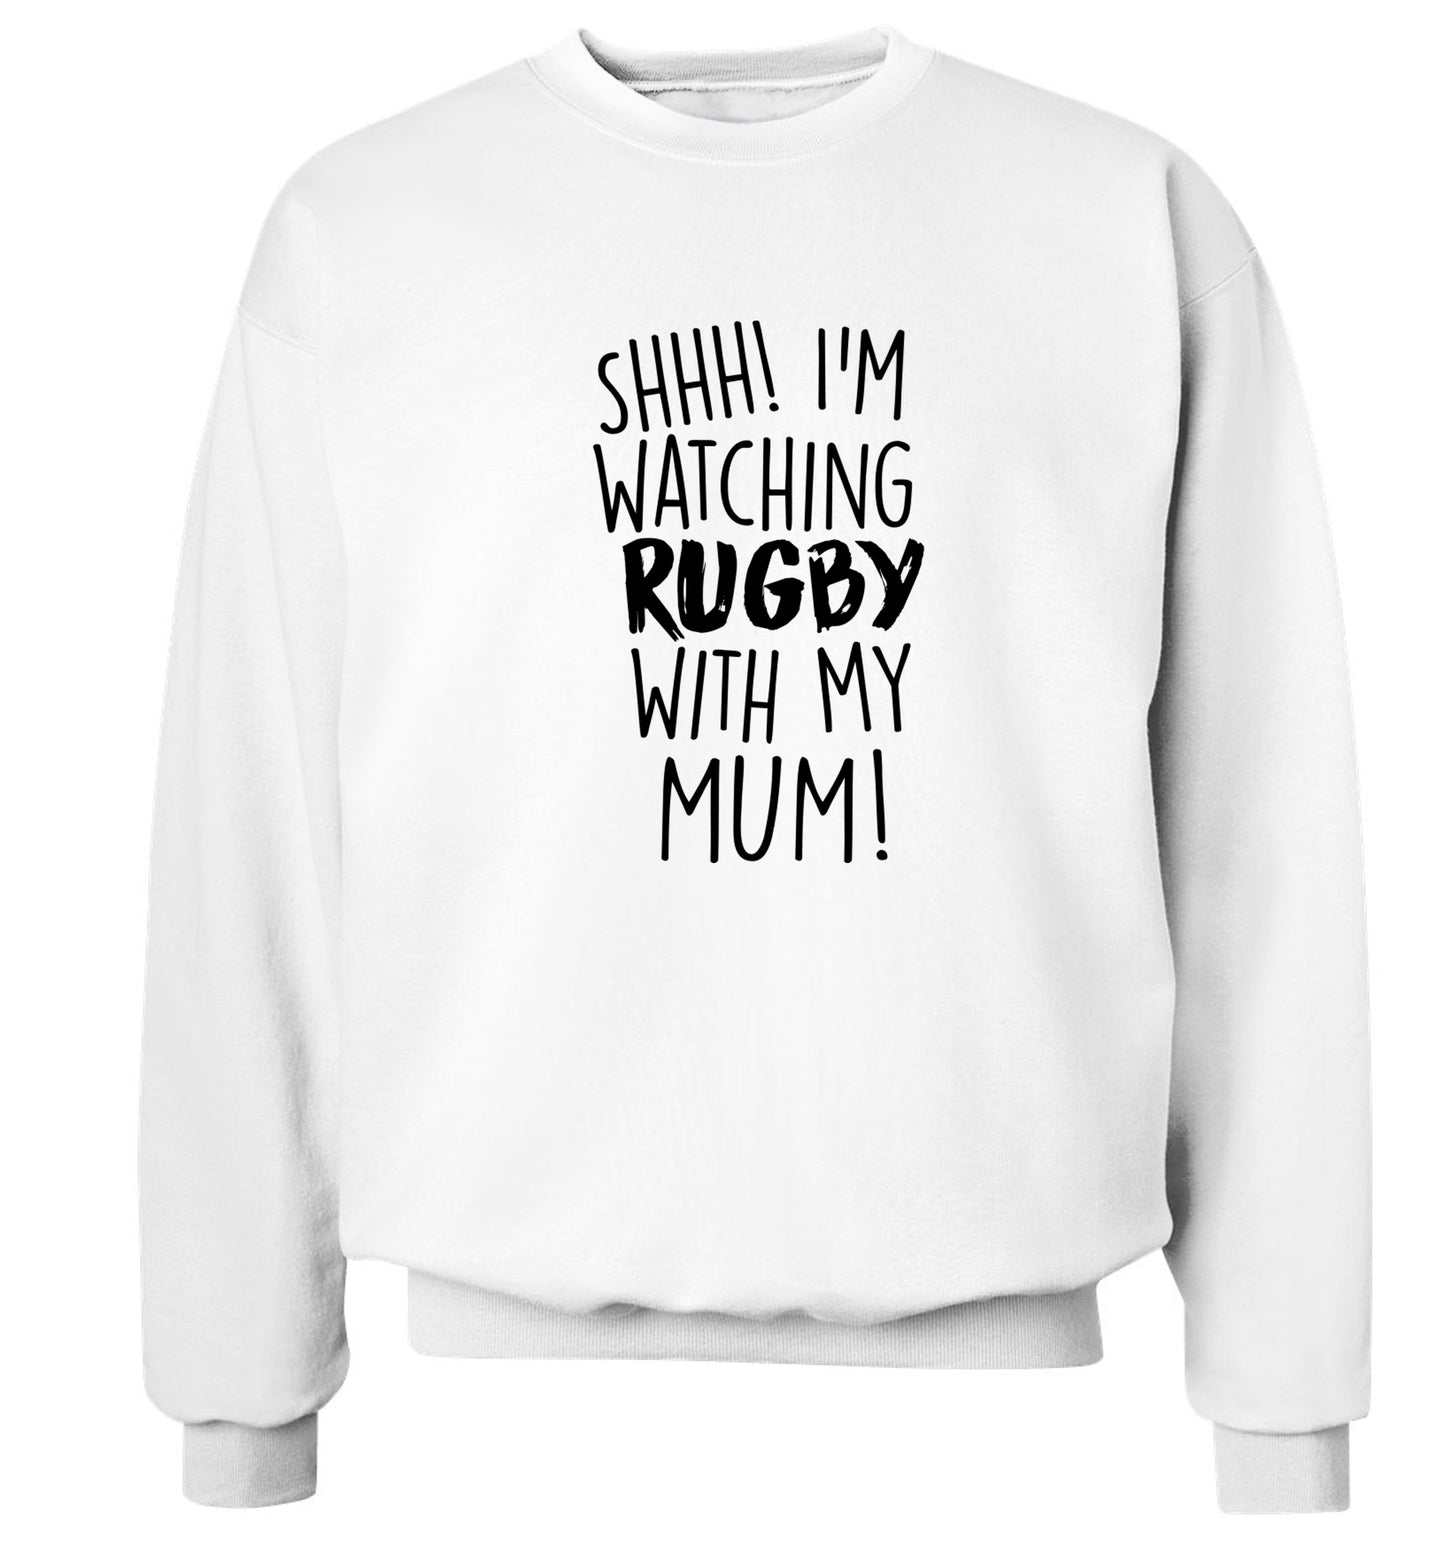 Shh... I'm watching rugby with my mum Adult's unisex white Sweater 2XL